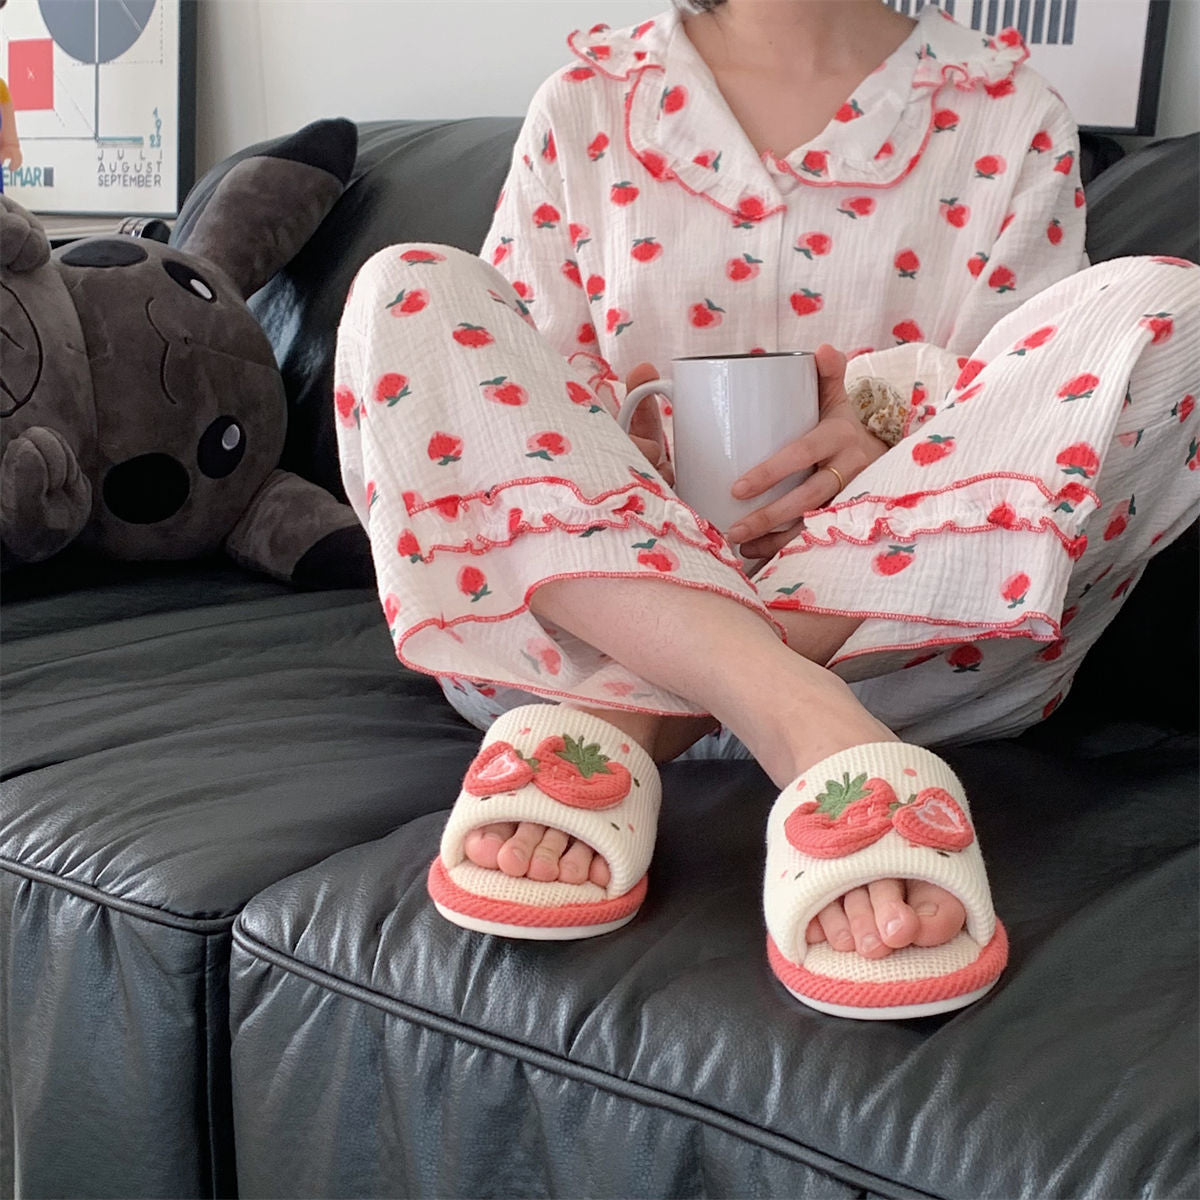 Women's Soft Bottom Slippers with Strawberries